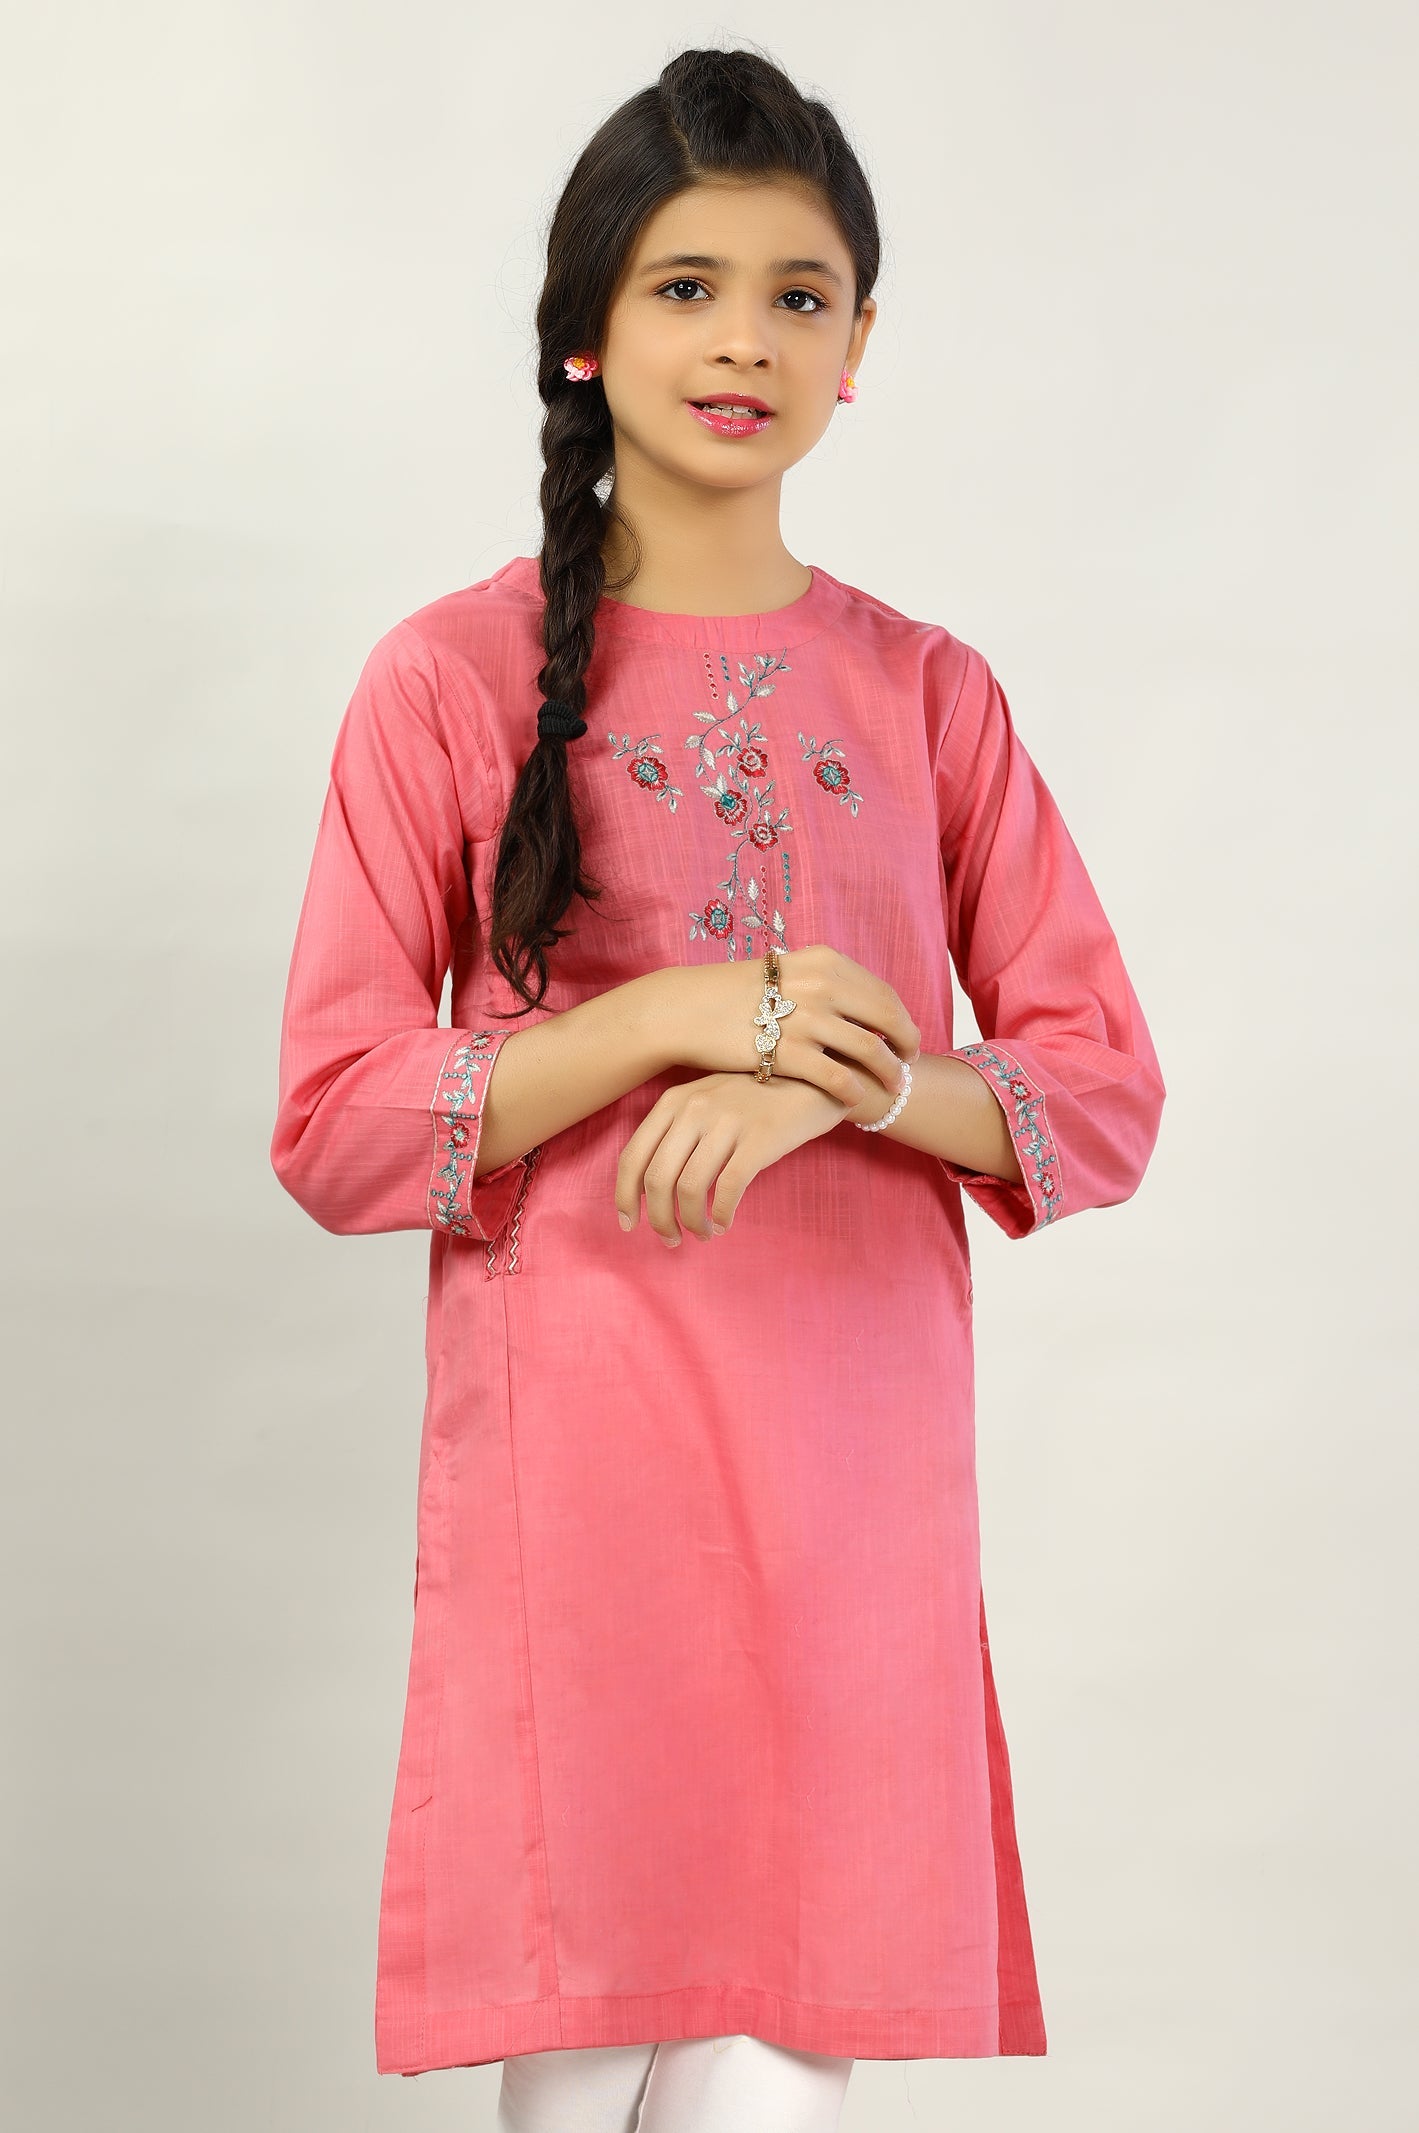 Buy Aarchi Heavy Rayon Orange Embroidered Kurti with Side-Cut for Kids Girls  (9-10 Years)(11-12 Years)(12-13 Years)(14-15 Years)(16-17 Years) at  Amazon.in